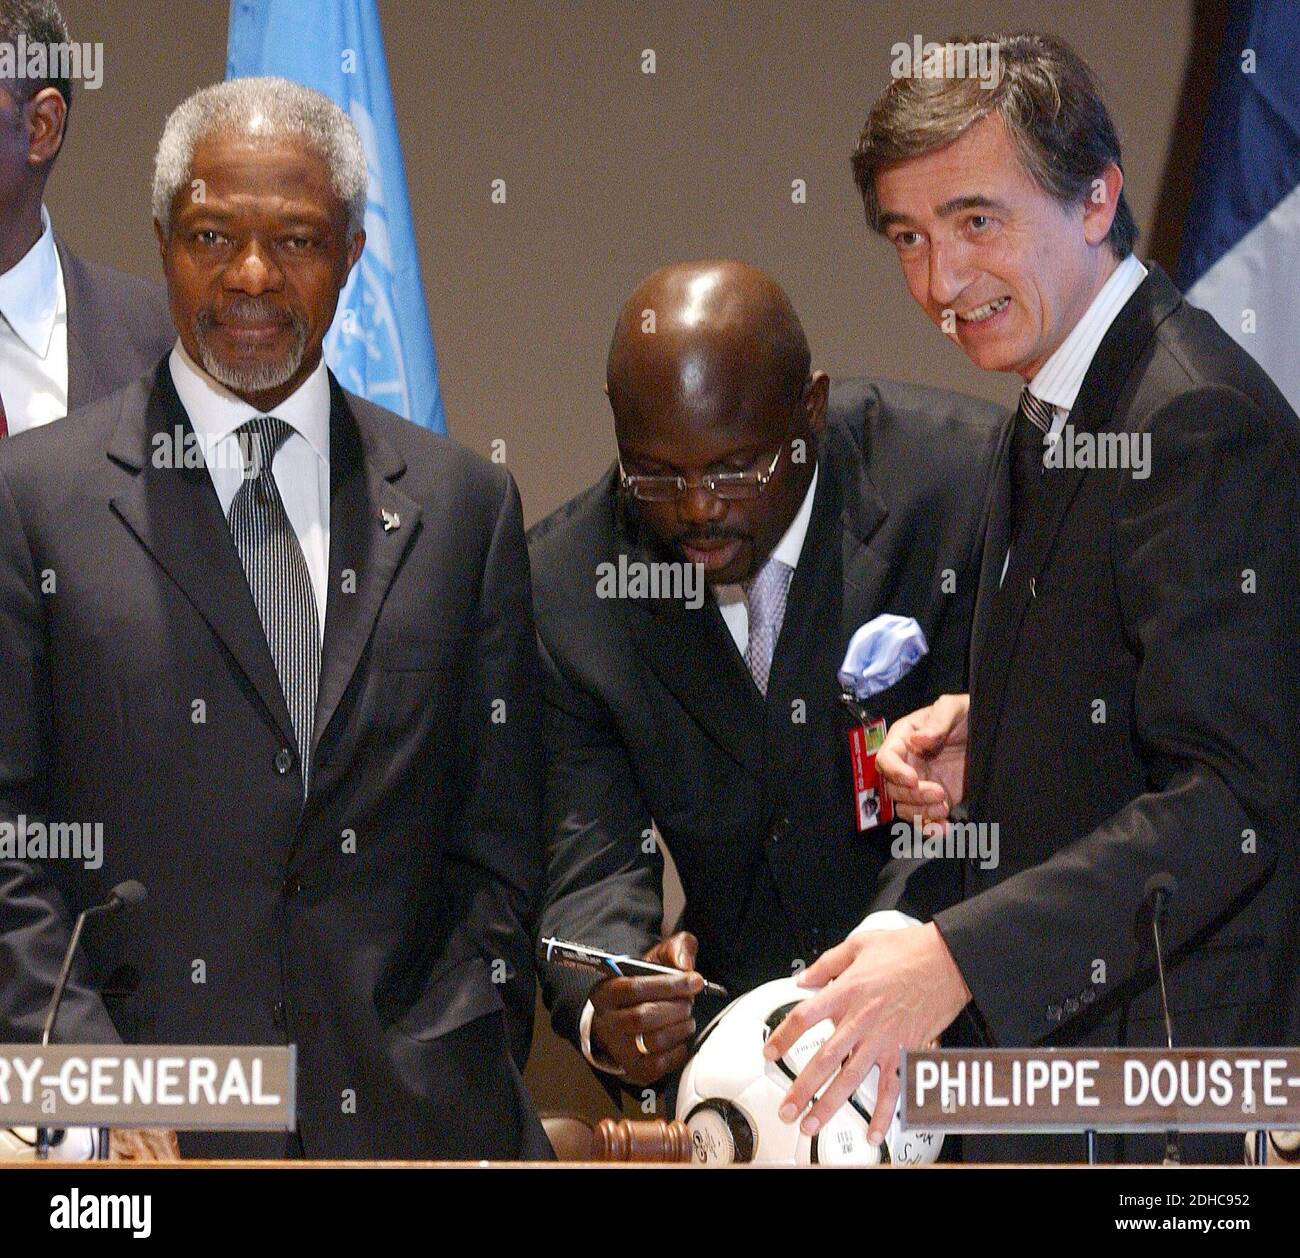 File photo : UN Secretary General Kofi Annan, Liberian soccer star and former presidential candidate George Weah and French Foreign Affairs Minister Philippe Douste-Blazy attend the 'Fight Against AIDS International Drug Purchase Facility' press conference at the United Nations Headquarters in New York, on Friday, June 2, 2006. Former football star George Weah has been elected as Liberia's president. Mr Weah is well ahead of opponent Joseph Boakai with more than 60% of the vote. Photo by Nicolas Khayat/ABACAPRESS.COM Stock Photo